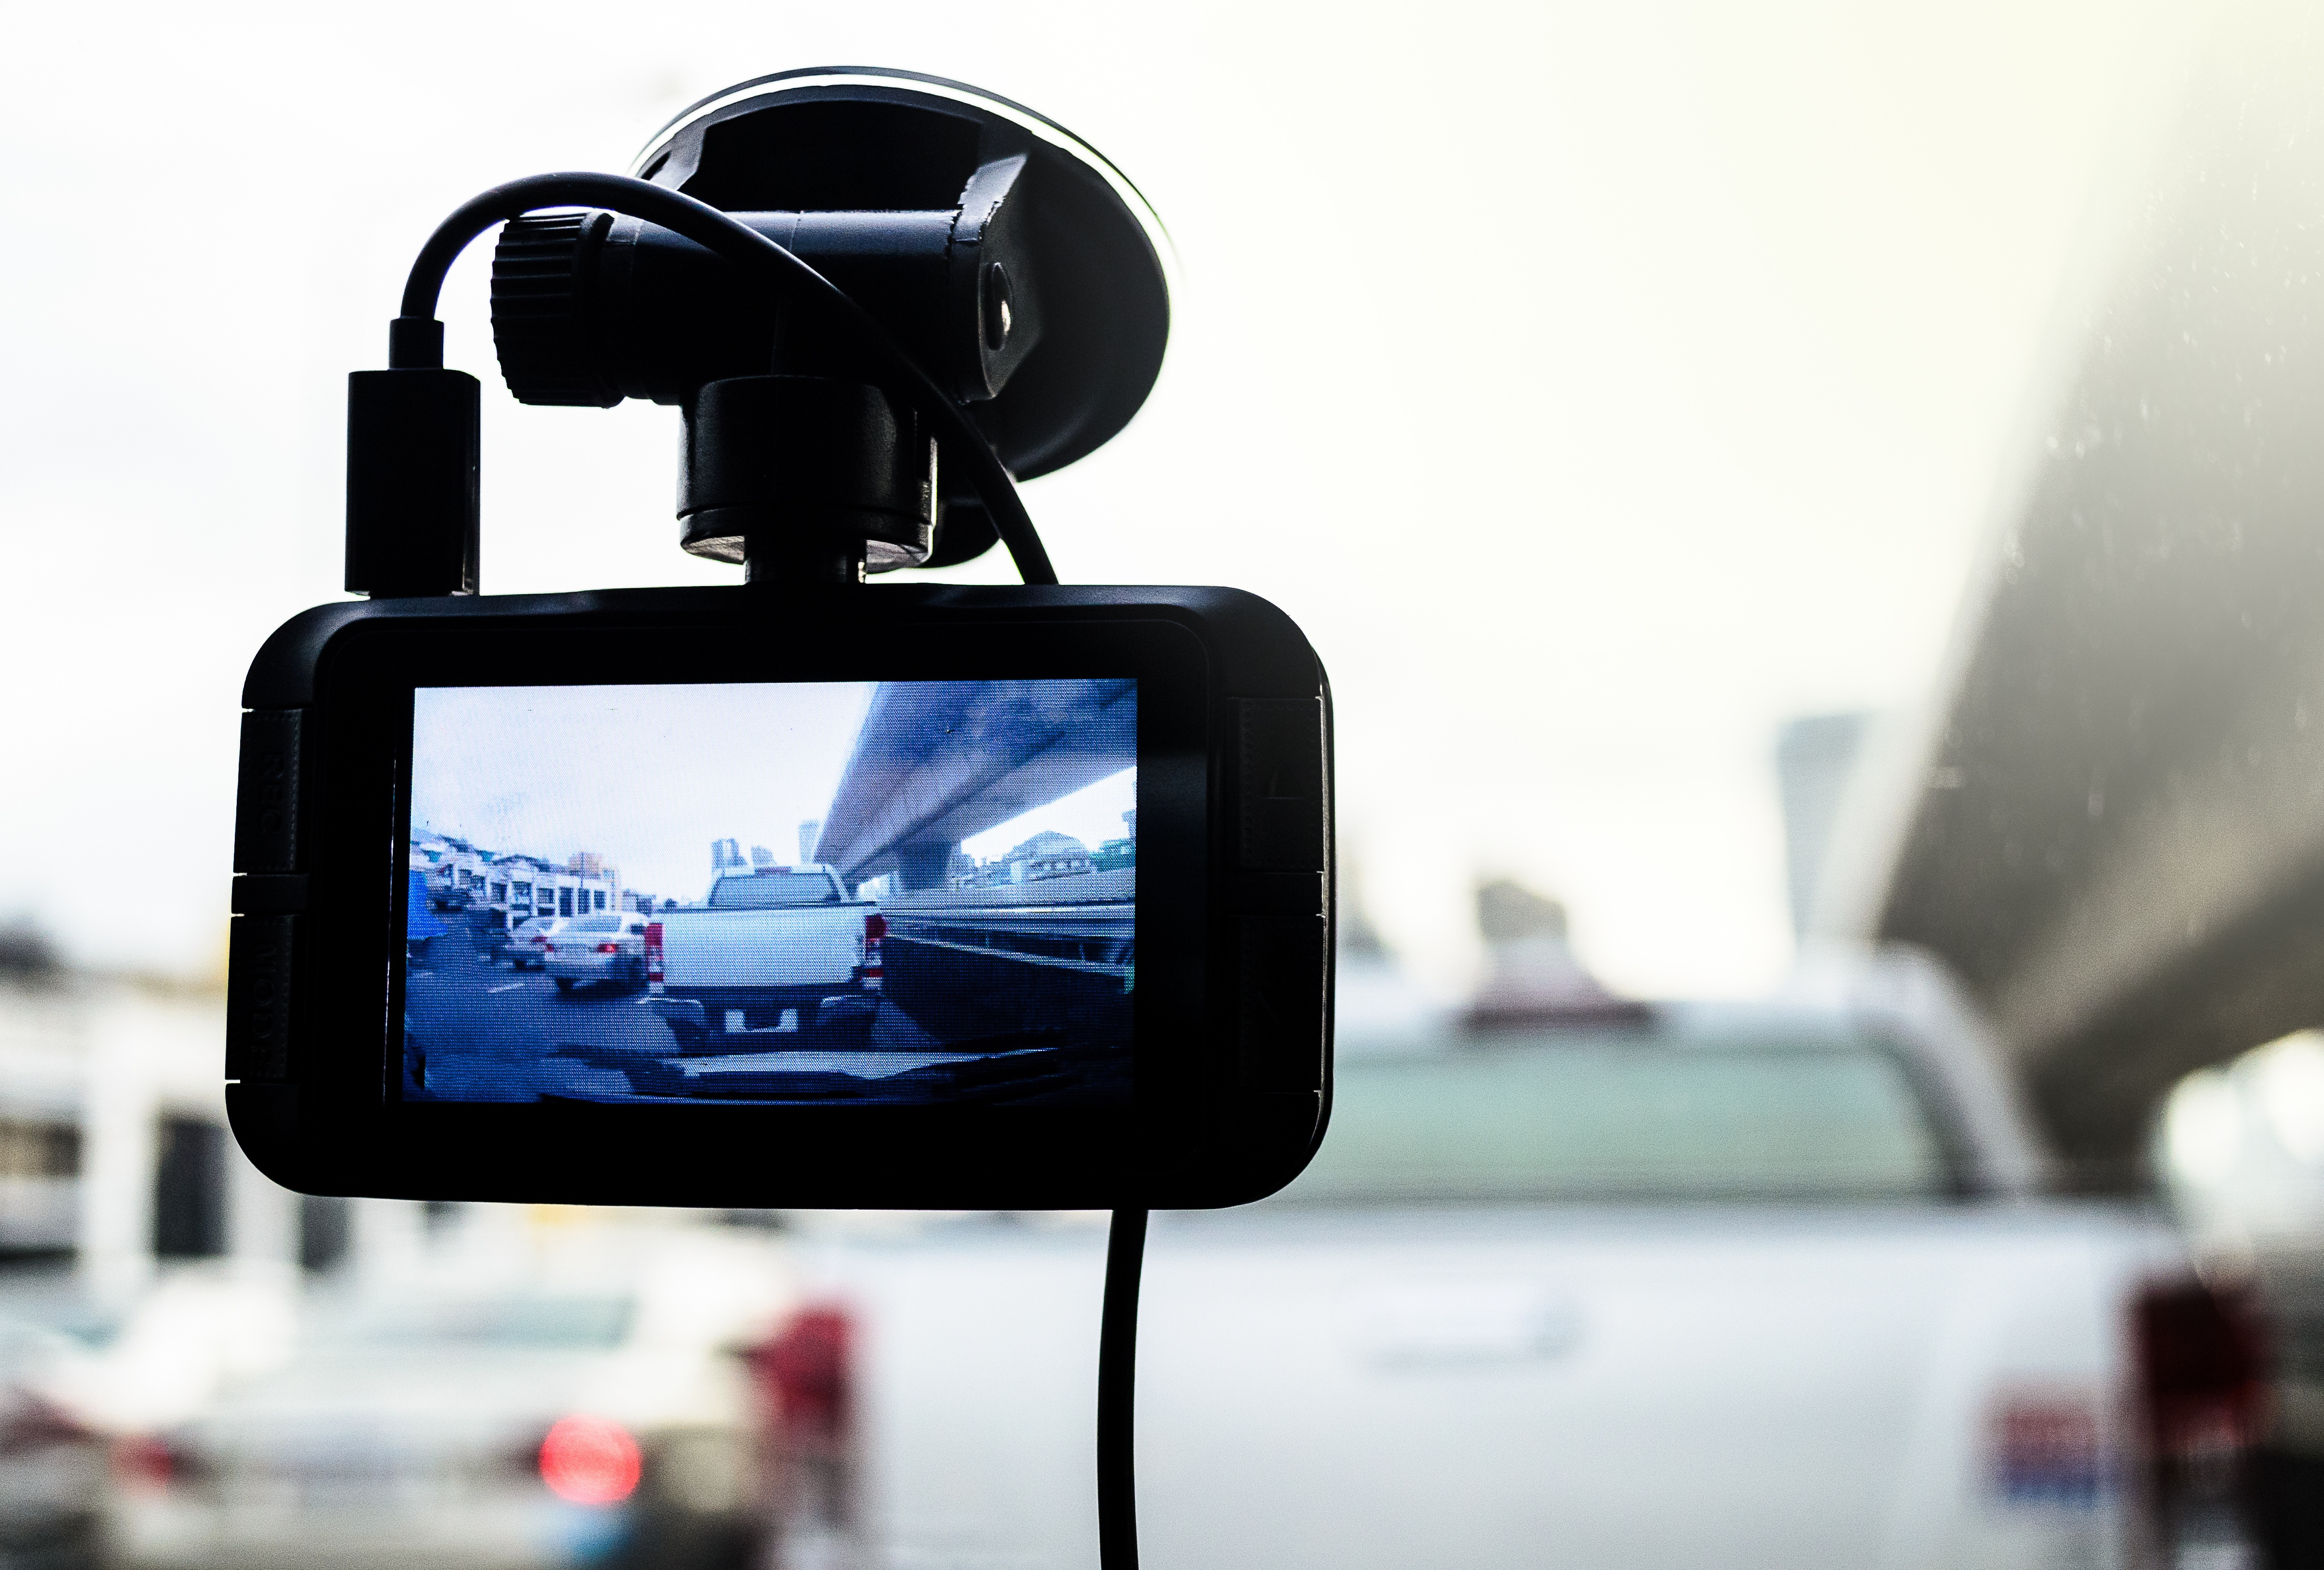 A Guide to Parked Recording with Dash Cameras